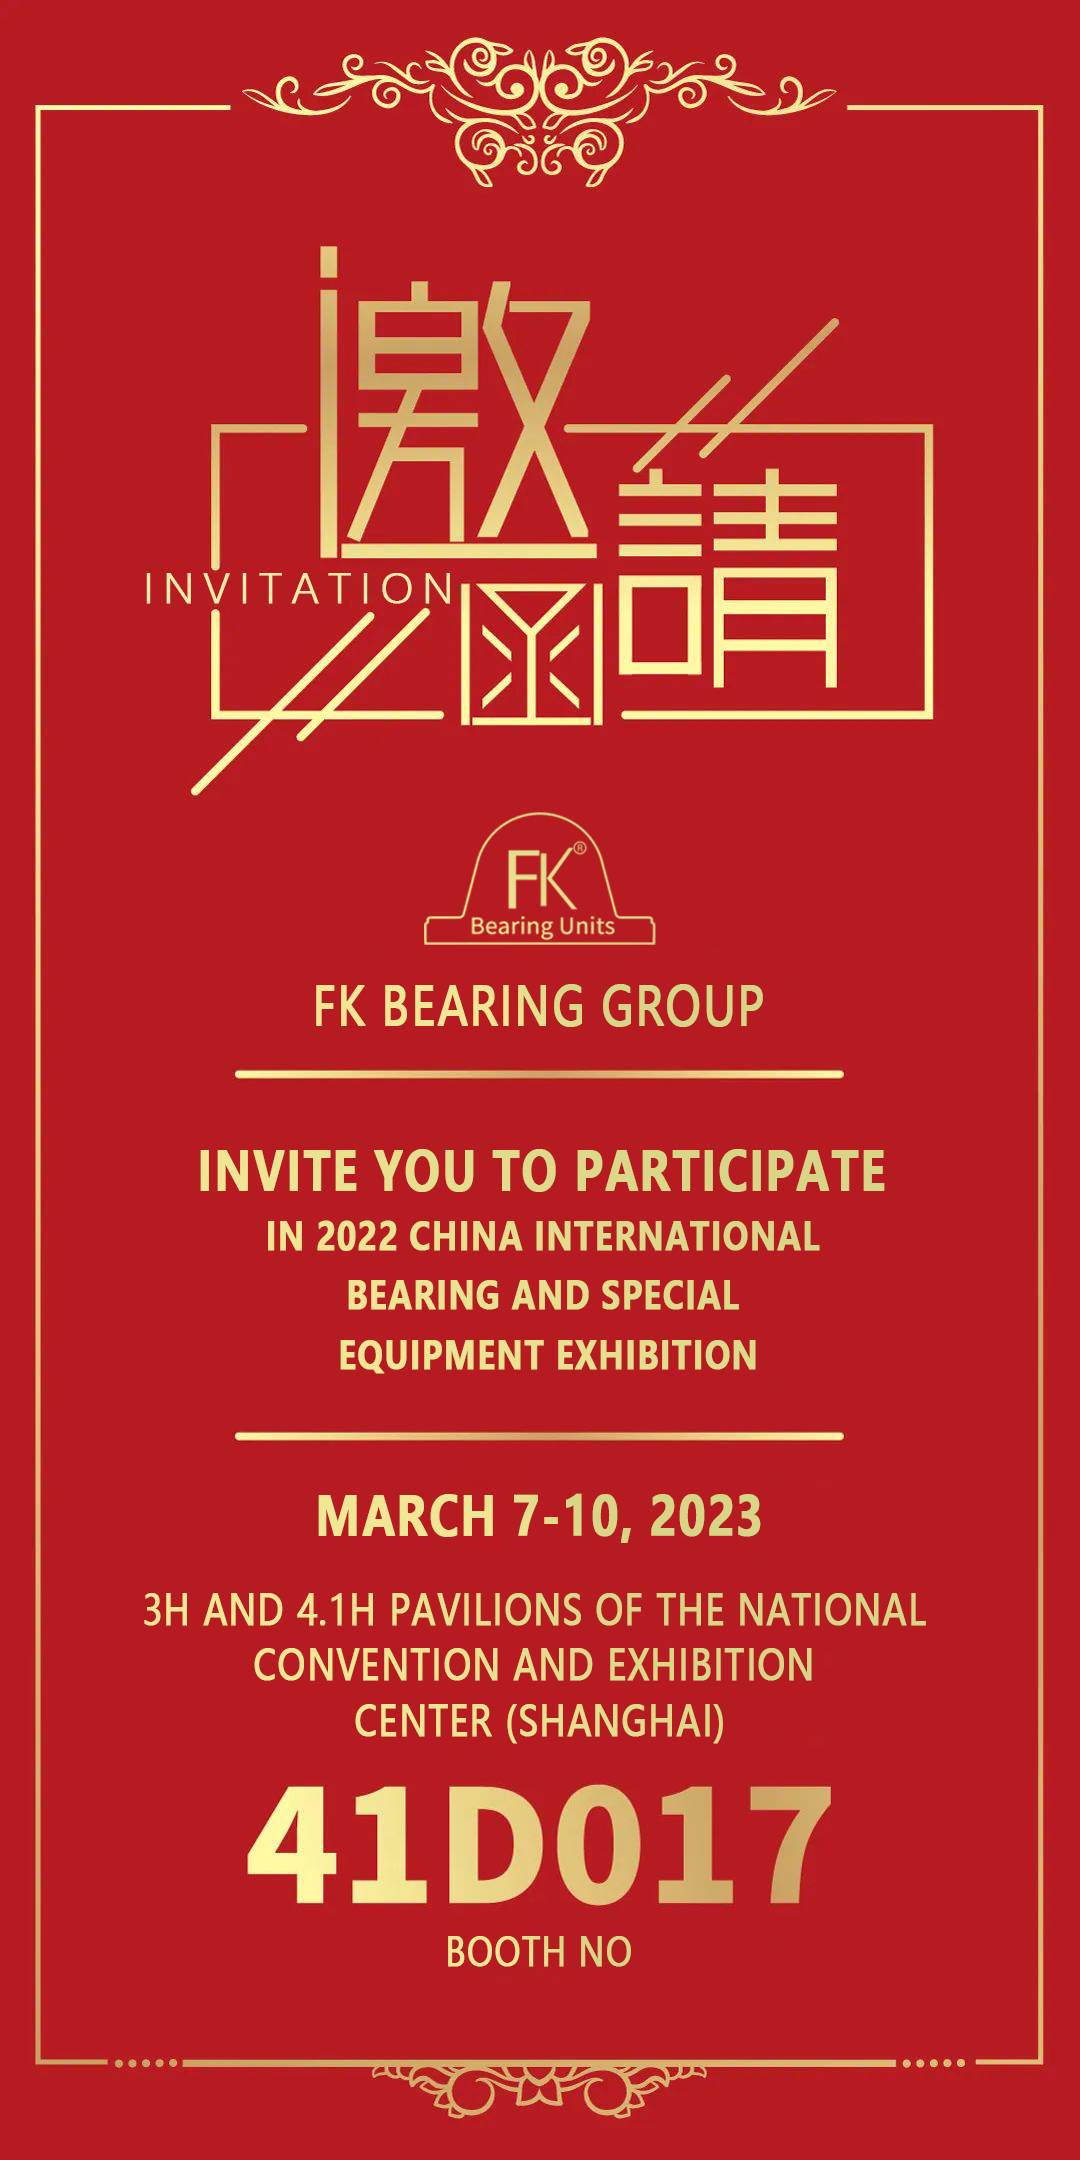 FK invites you to participate in 2023 China International Bearing and Special Equipment Exhibition